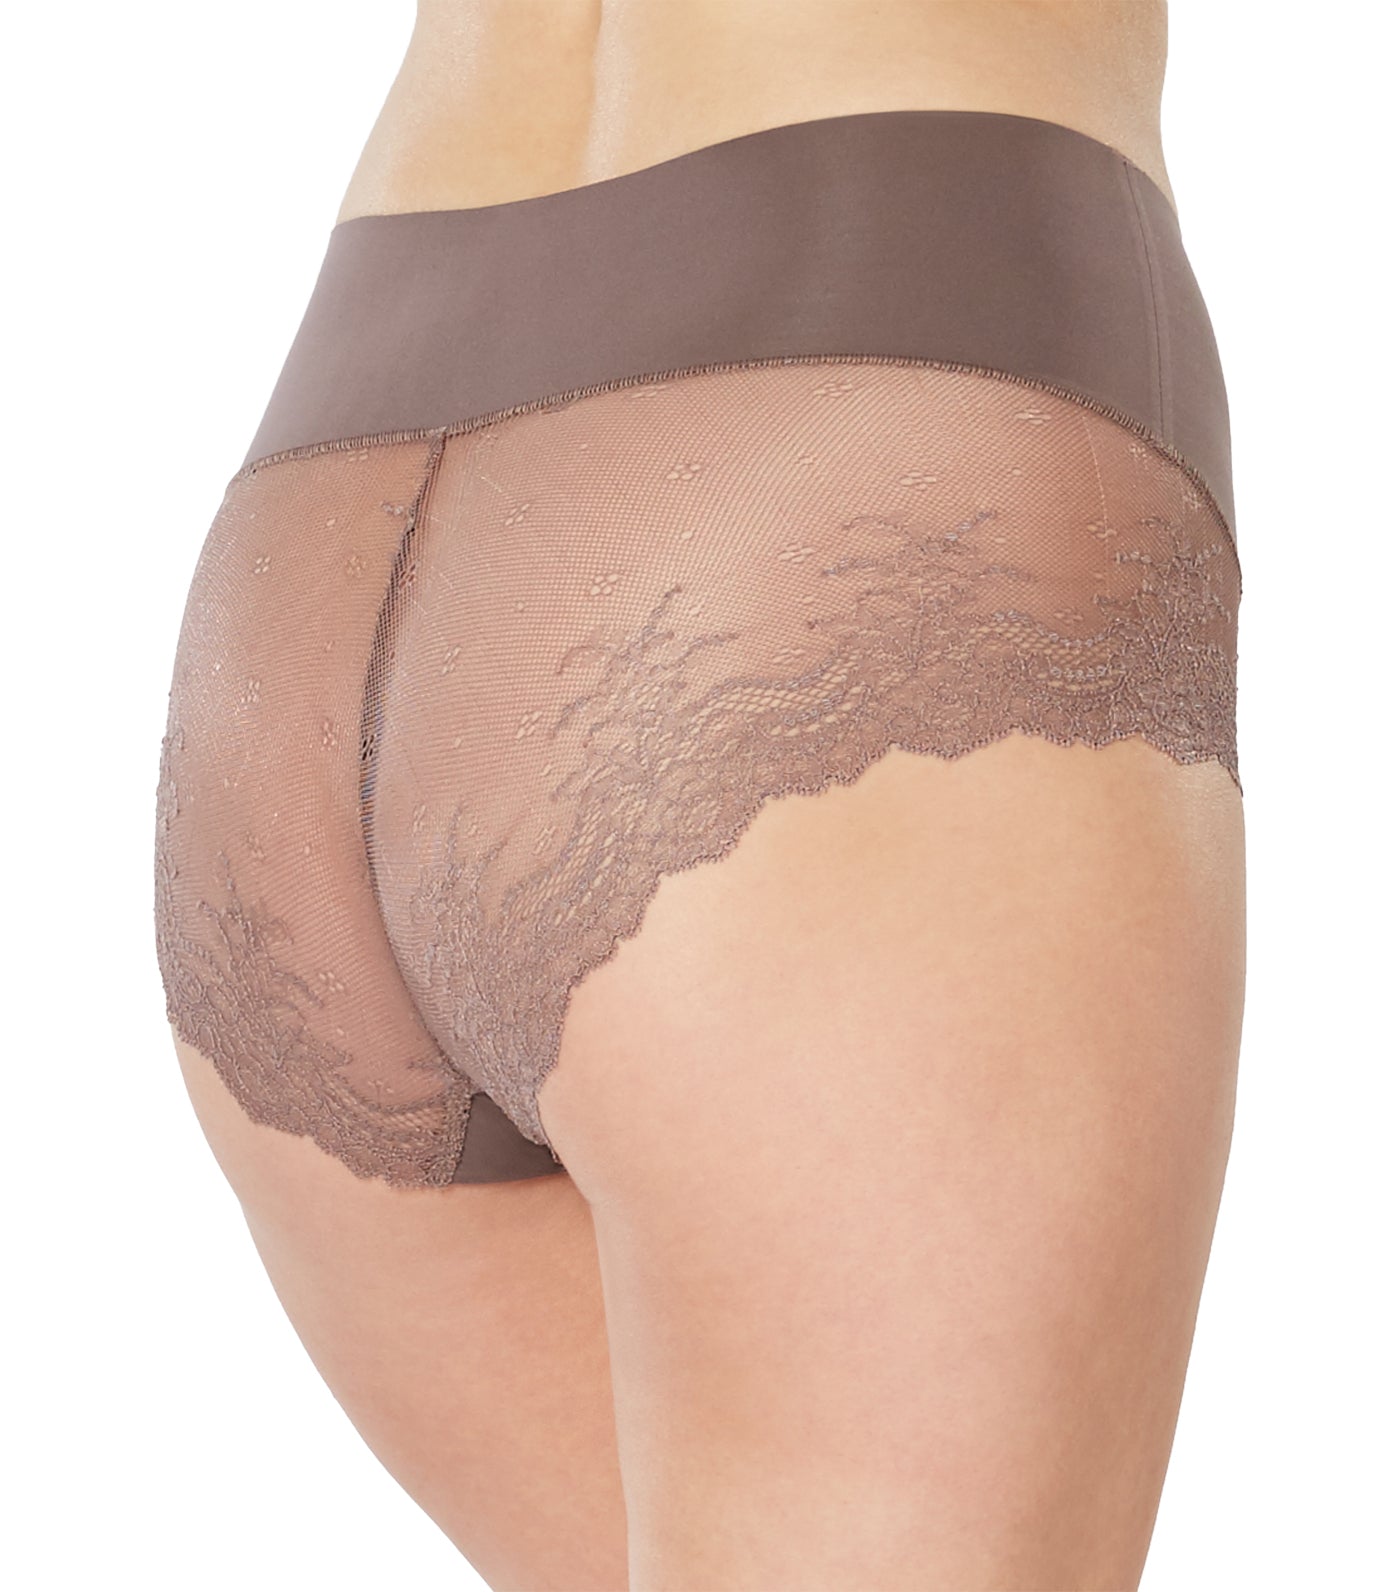 Spanx Lace Hi-hipster